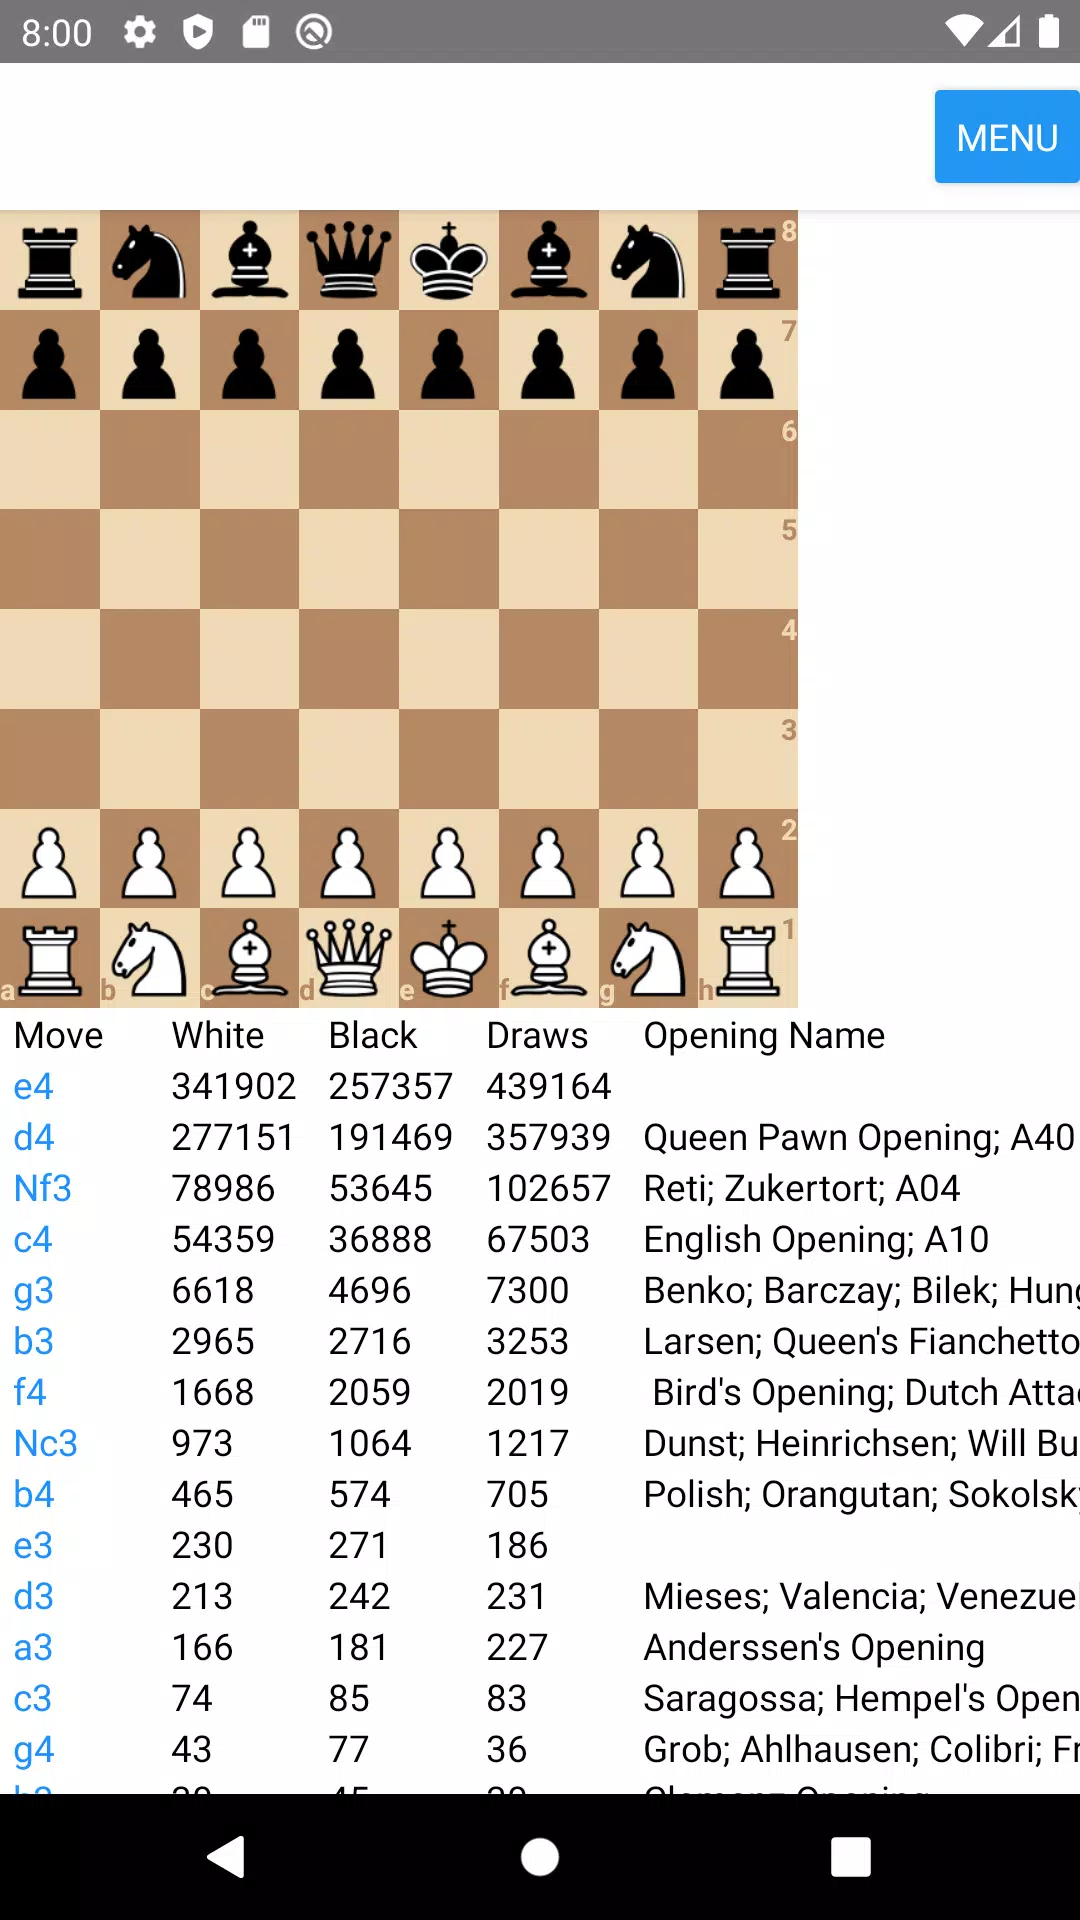 Chess Openings Trainer Pro APK (Android Game) - Free Download